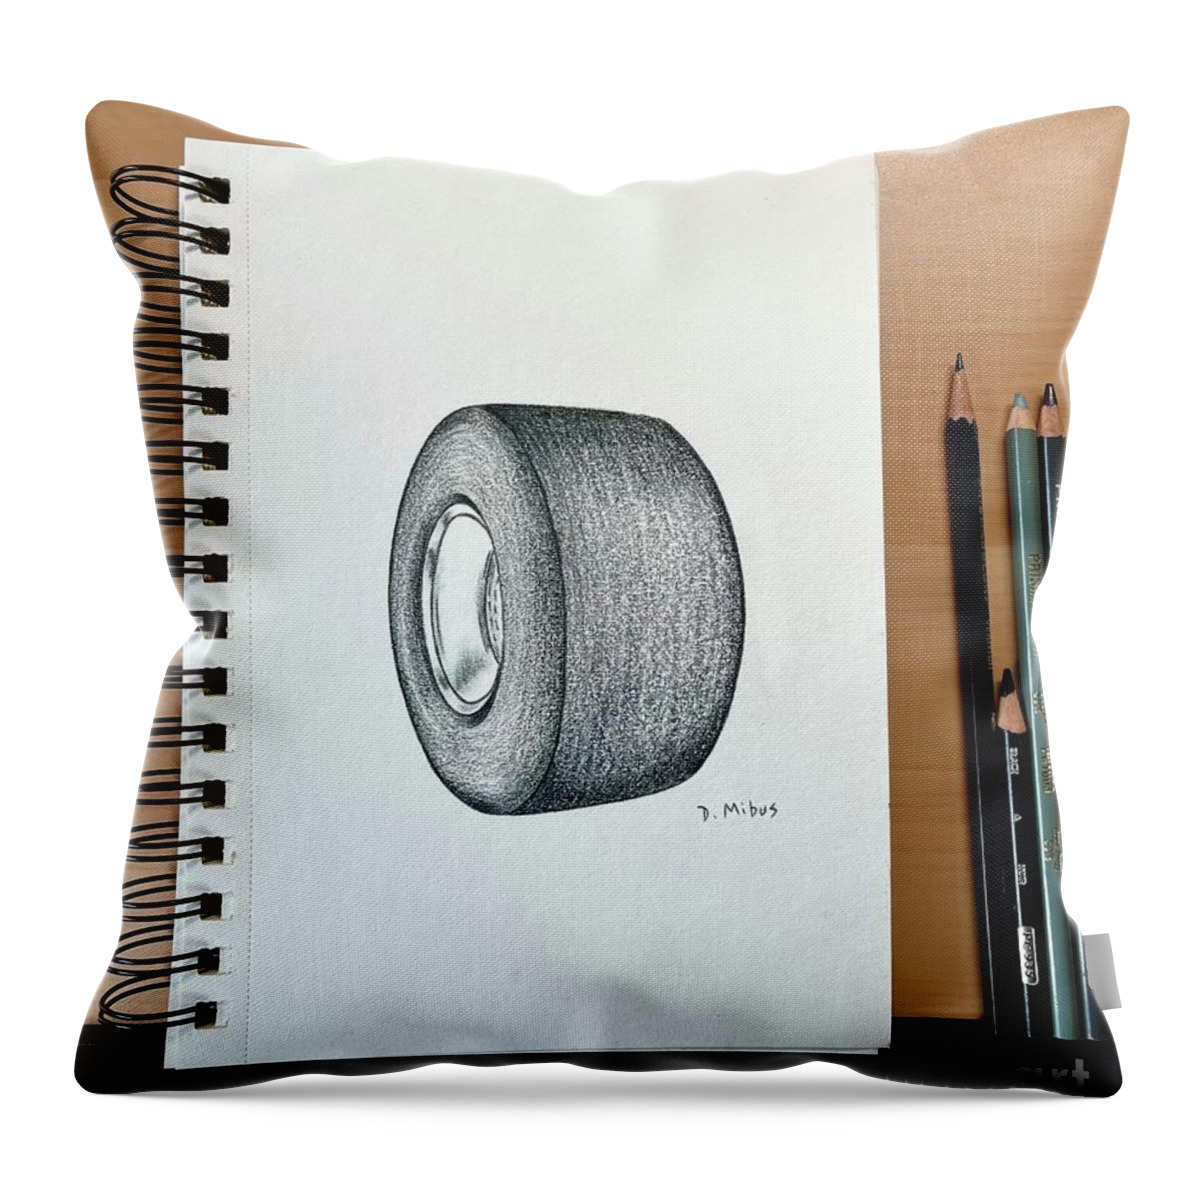  Throw Pillow featuring the drawing Sketch of Drag Racer wheel by Donna Mibus